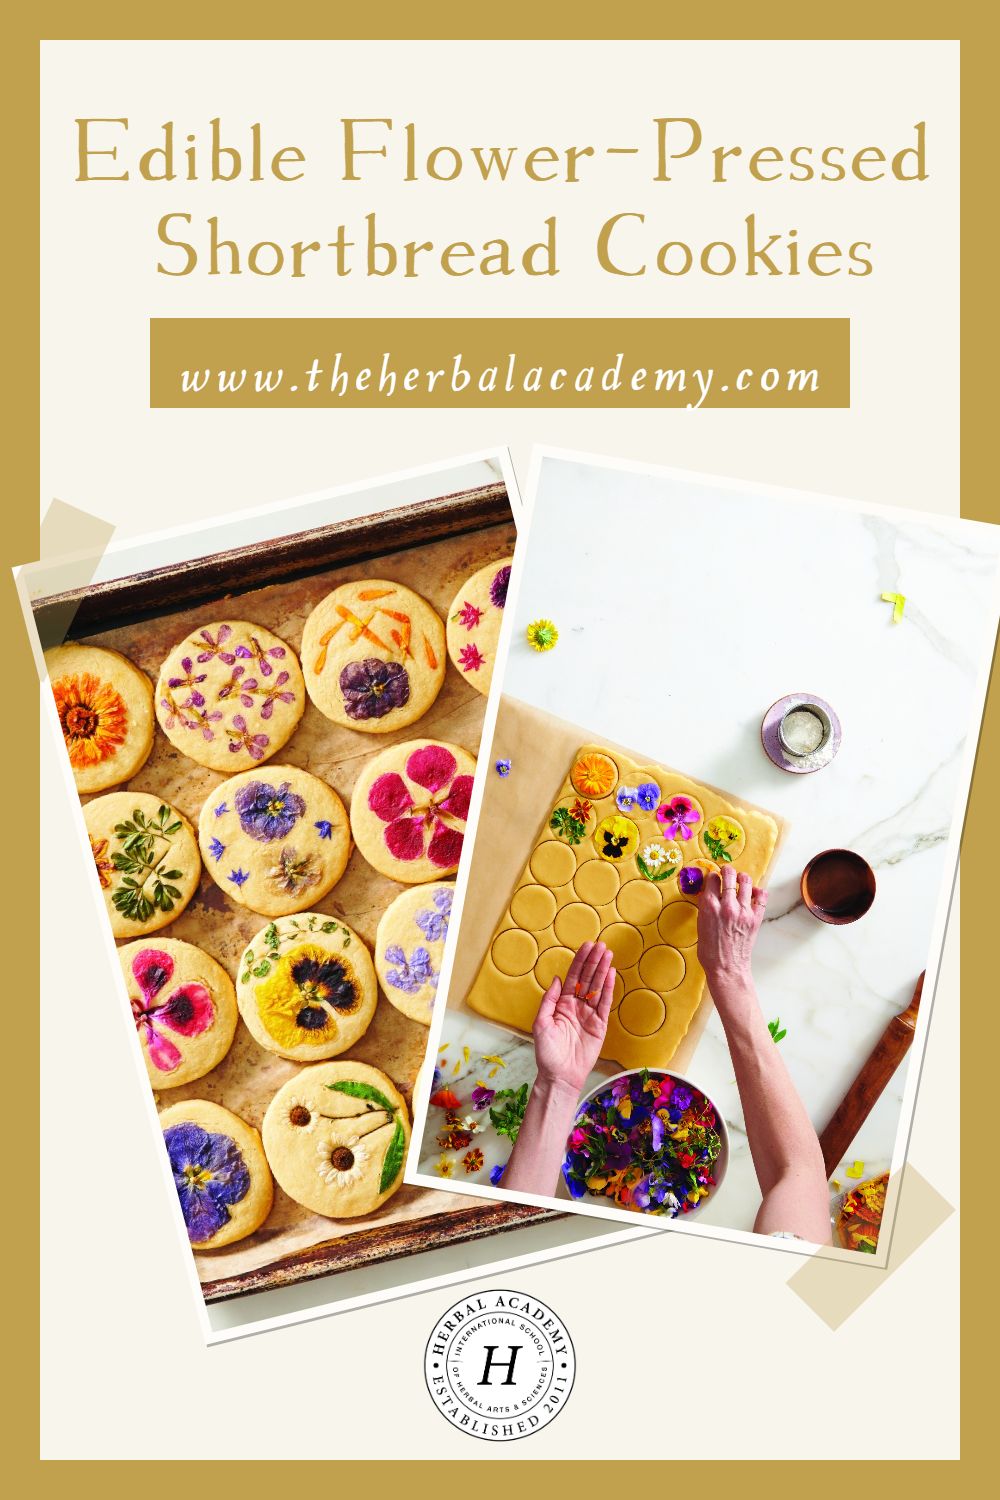 Edible Flower-Pressed Shortbread Cookies | Herbal Academy | This recipe for delicately sweet shortbread cookies is taken from Loria Stern's brand-new book release, Eat Your Flowers.